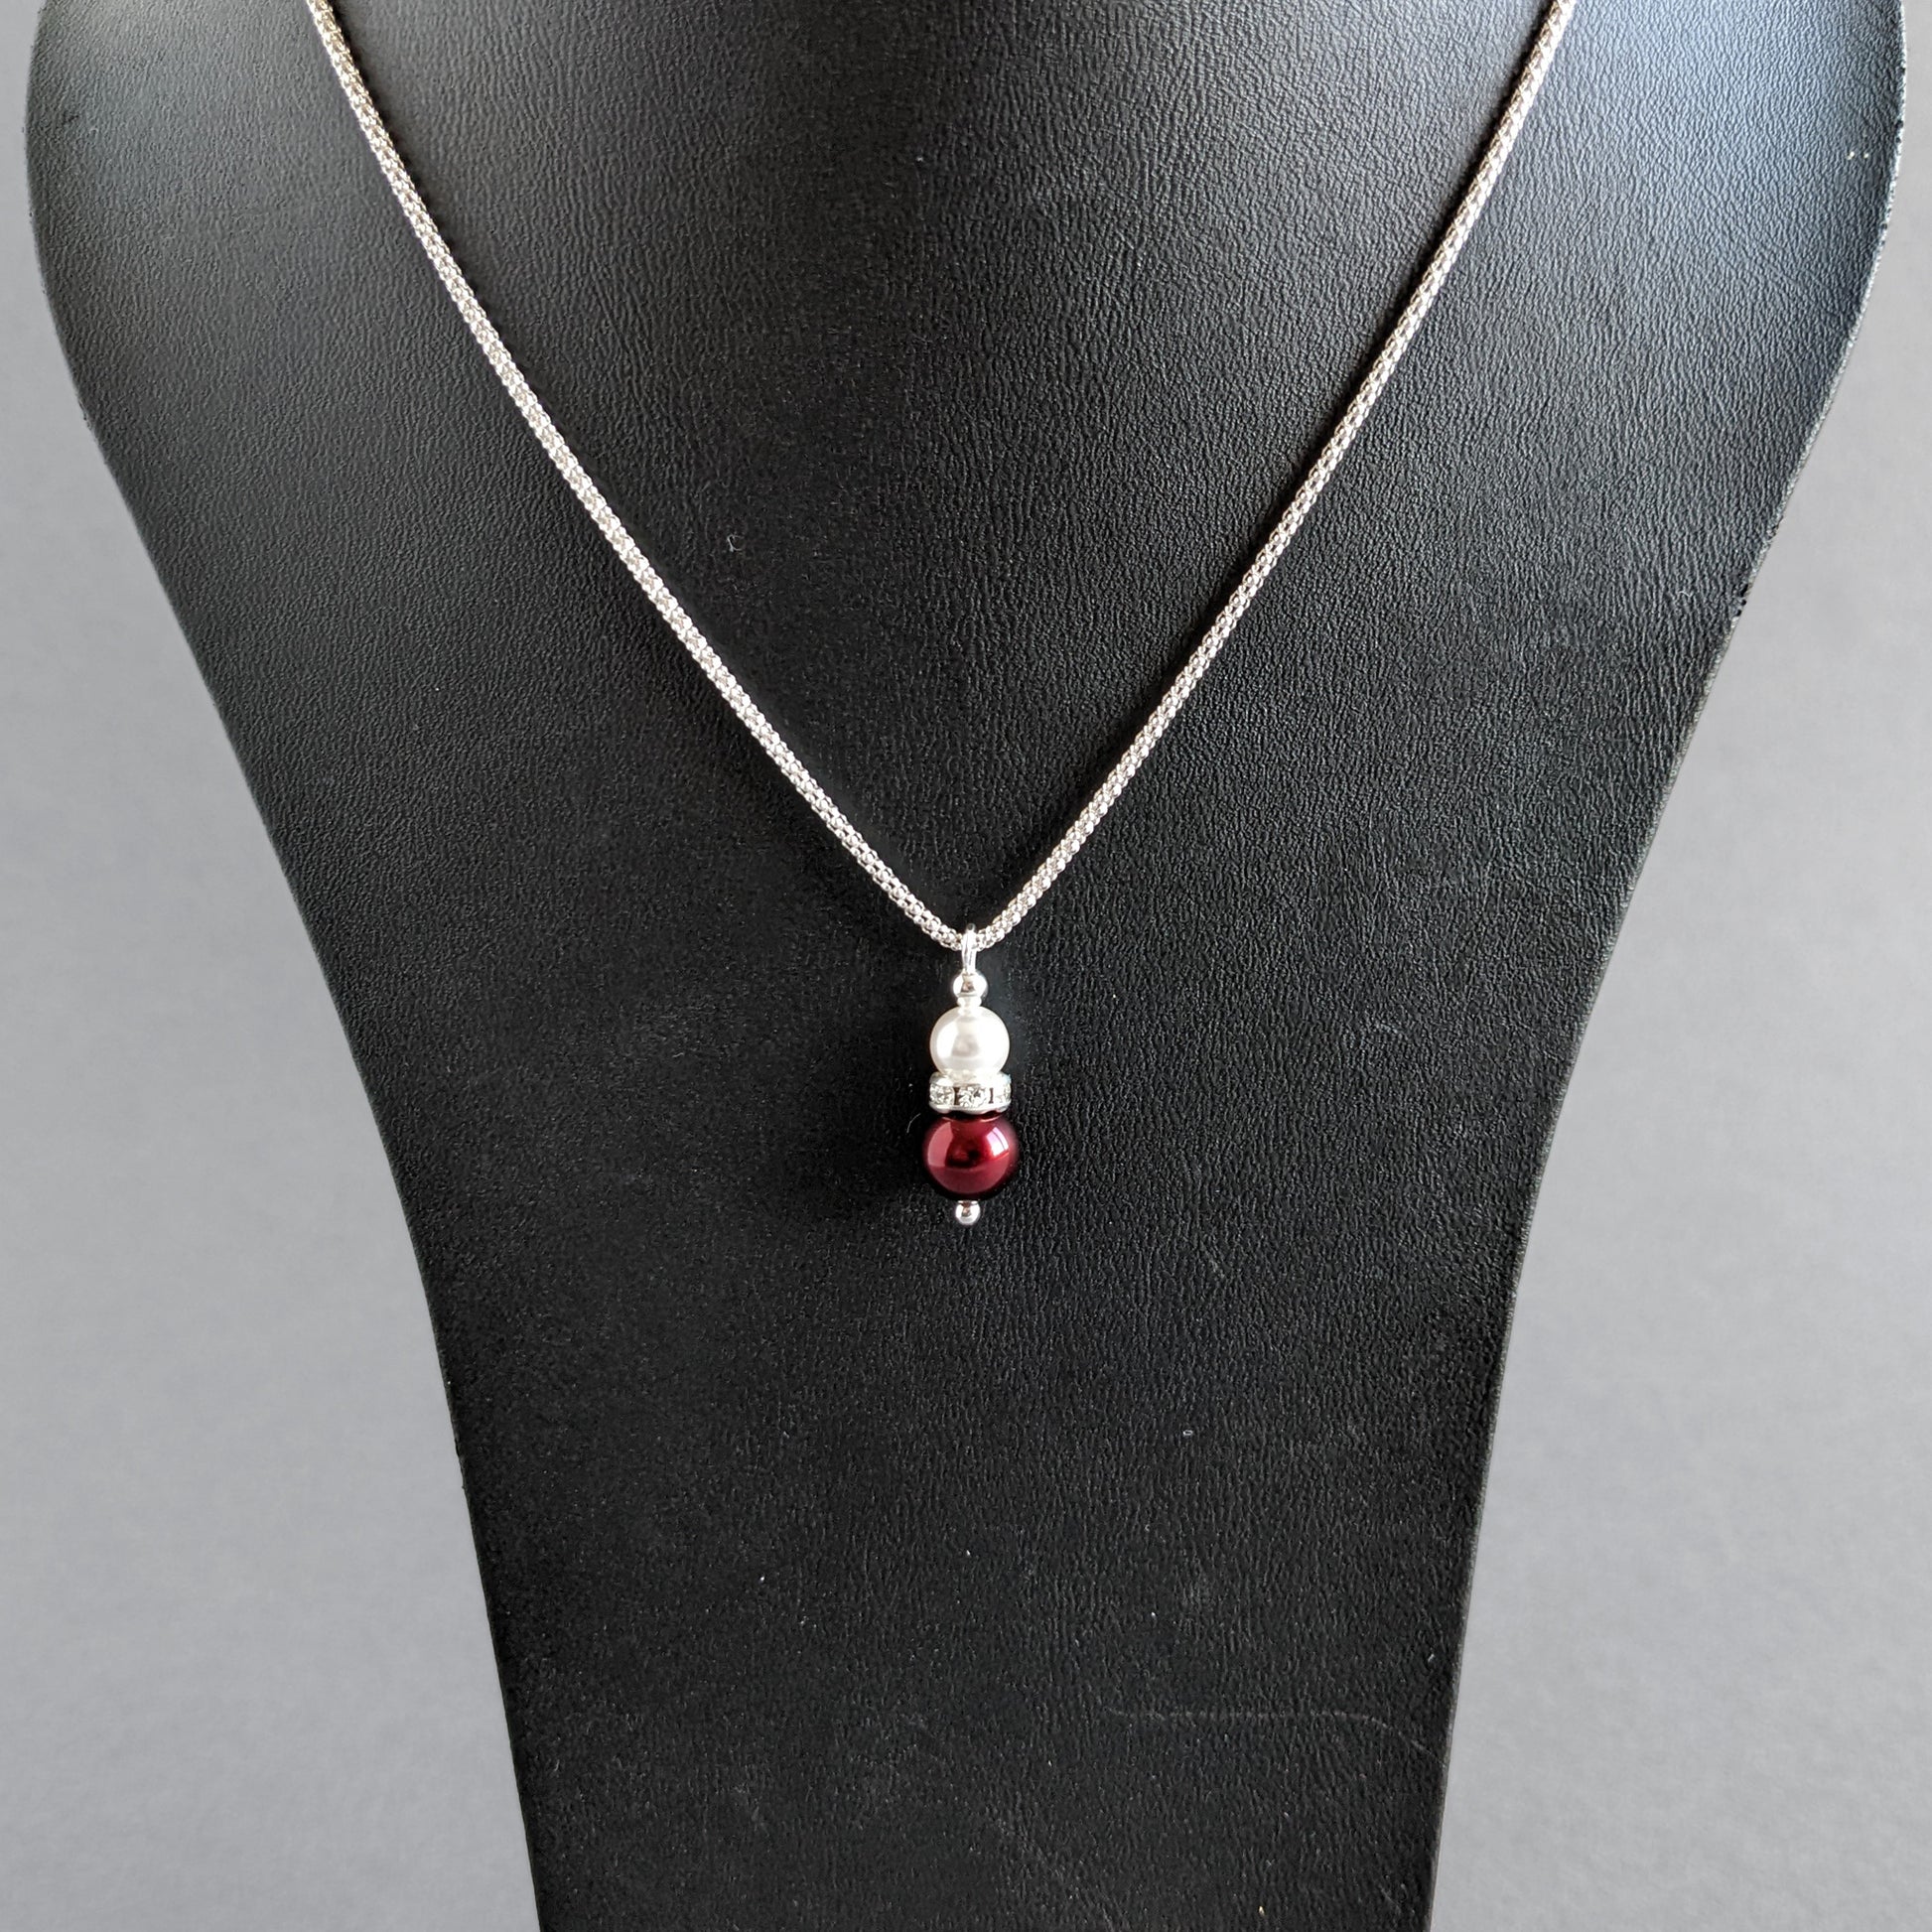 Burgundy and white pearl drop necklace